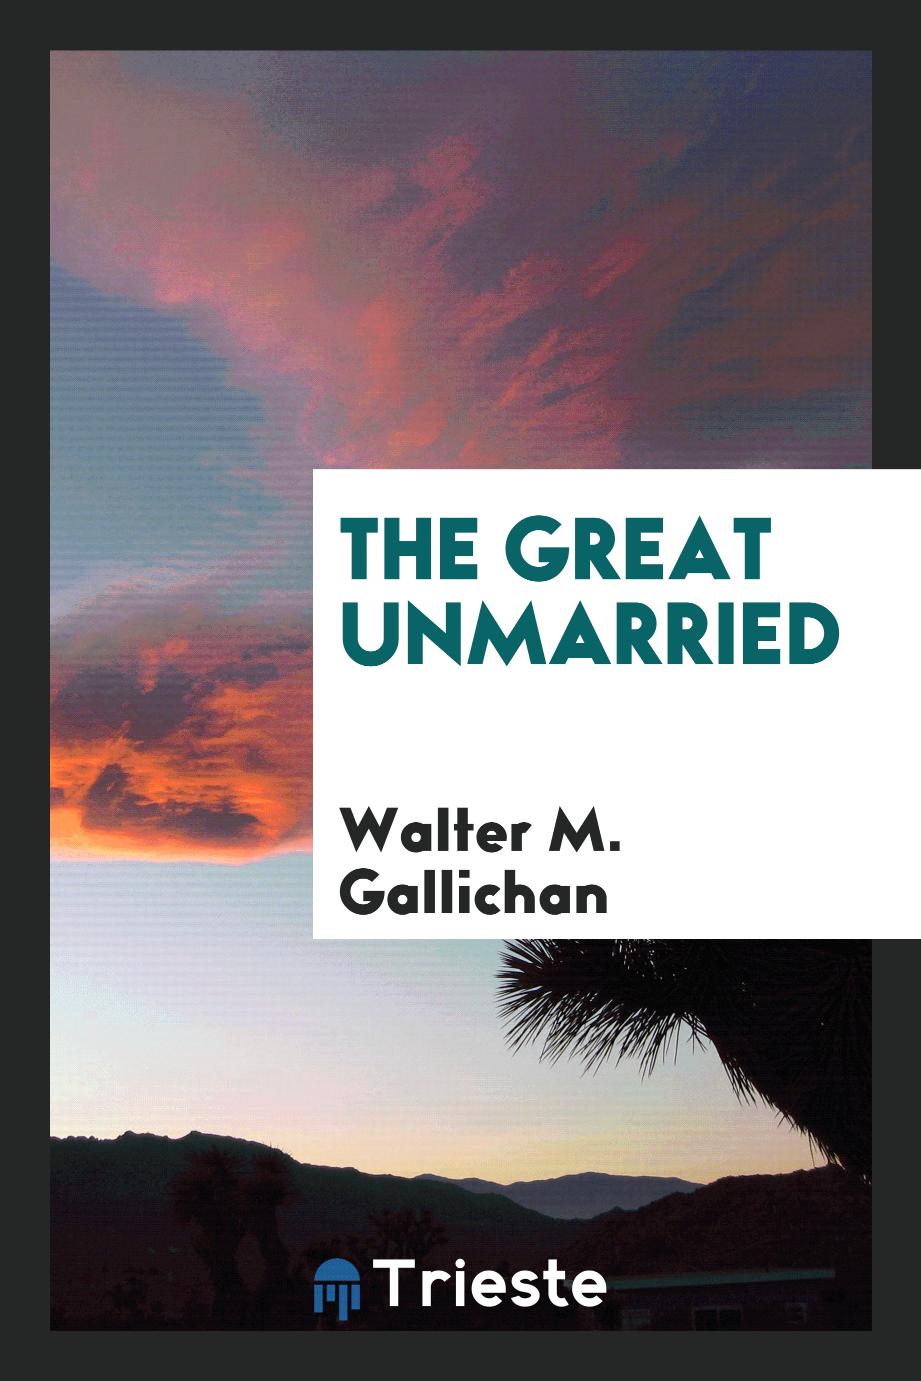 The great unmarried